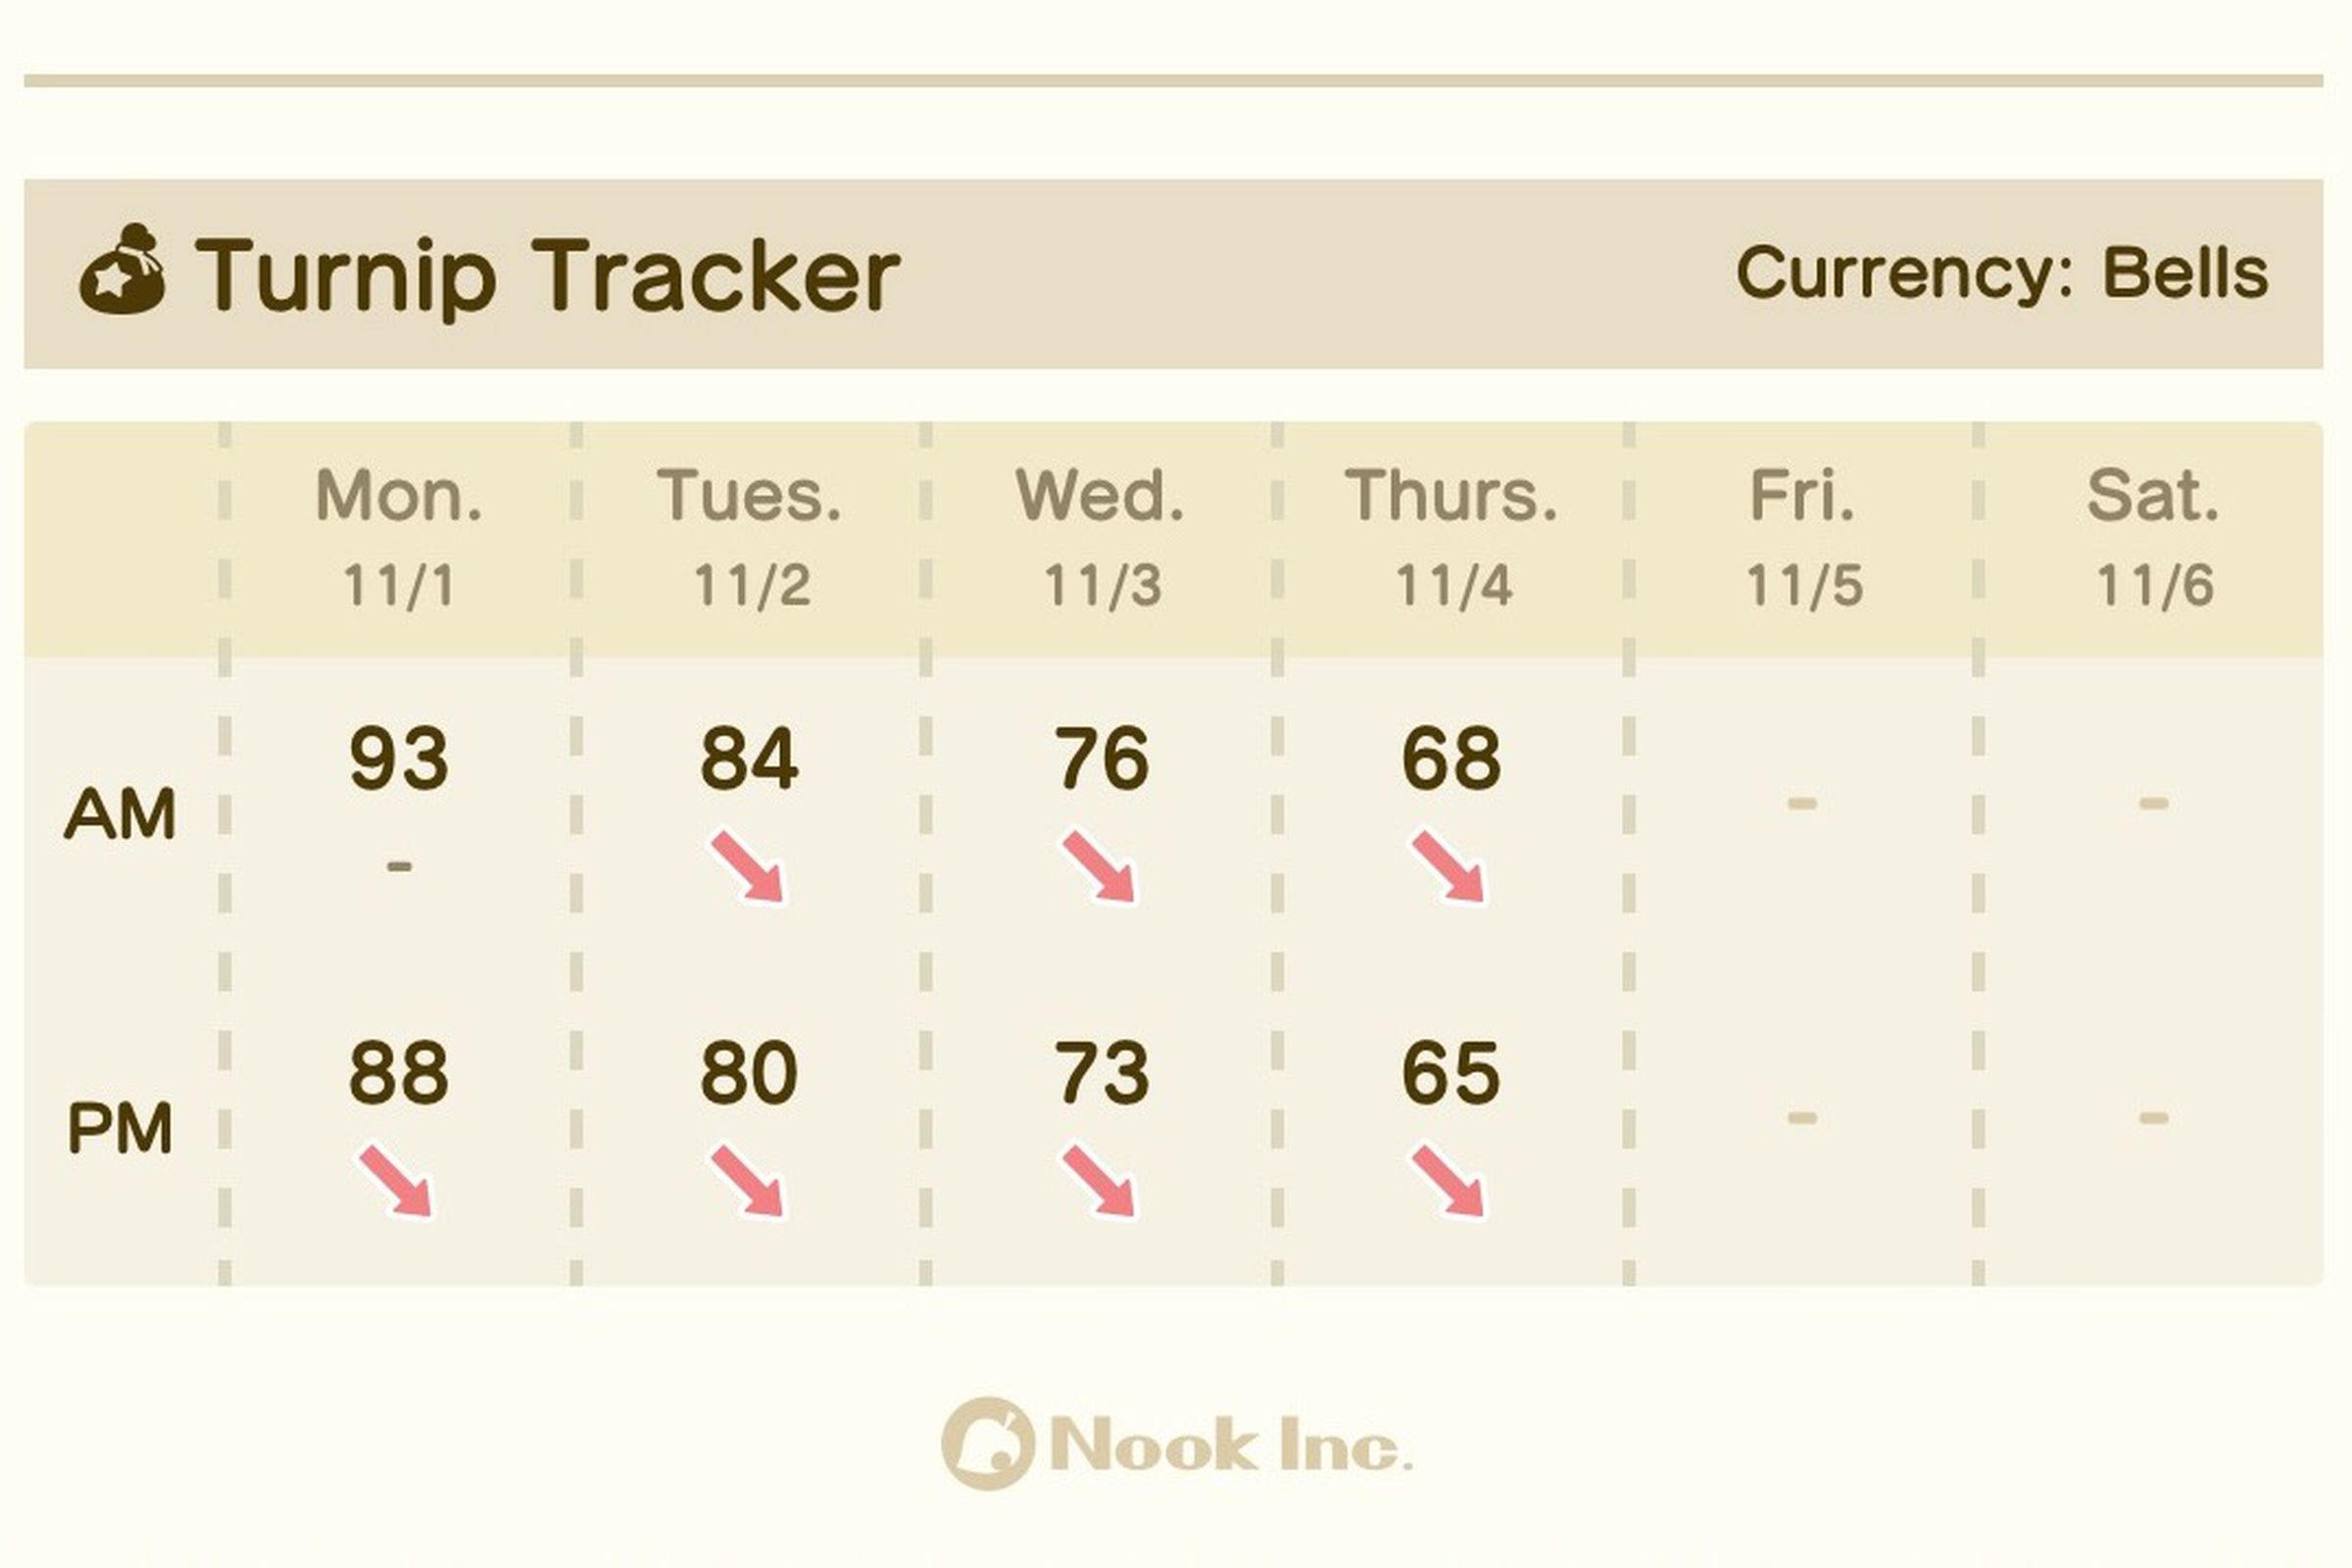 The new Turnip Tracker isn’t showing today’s price.